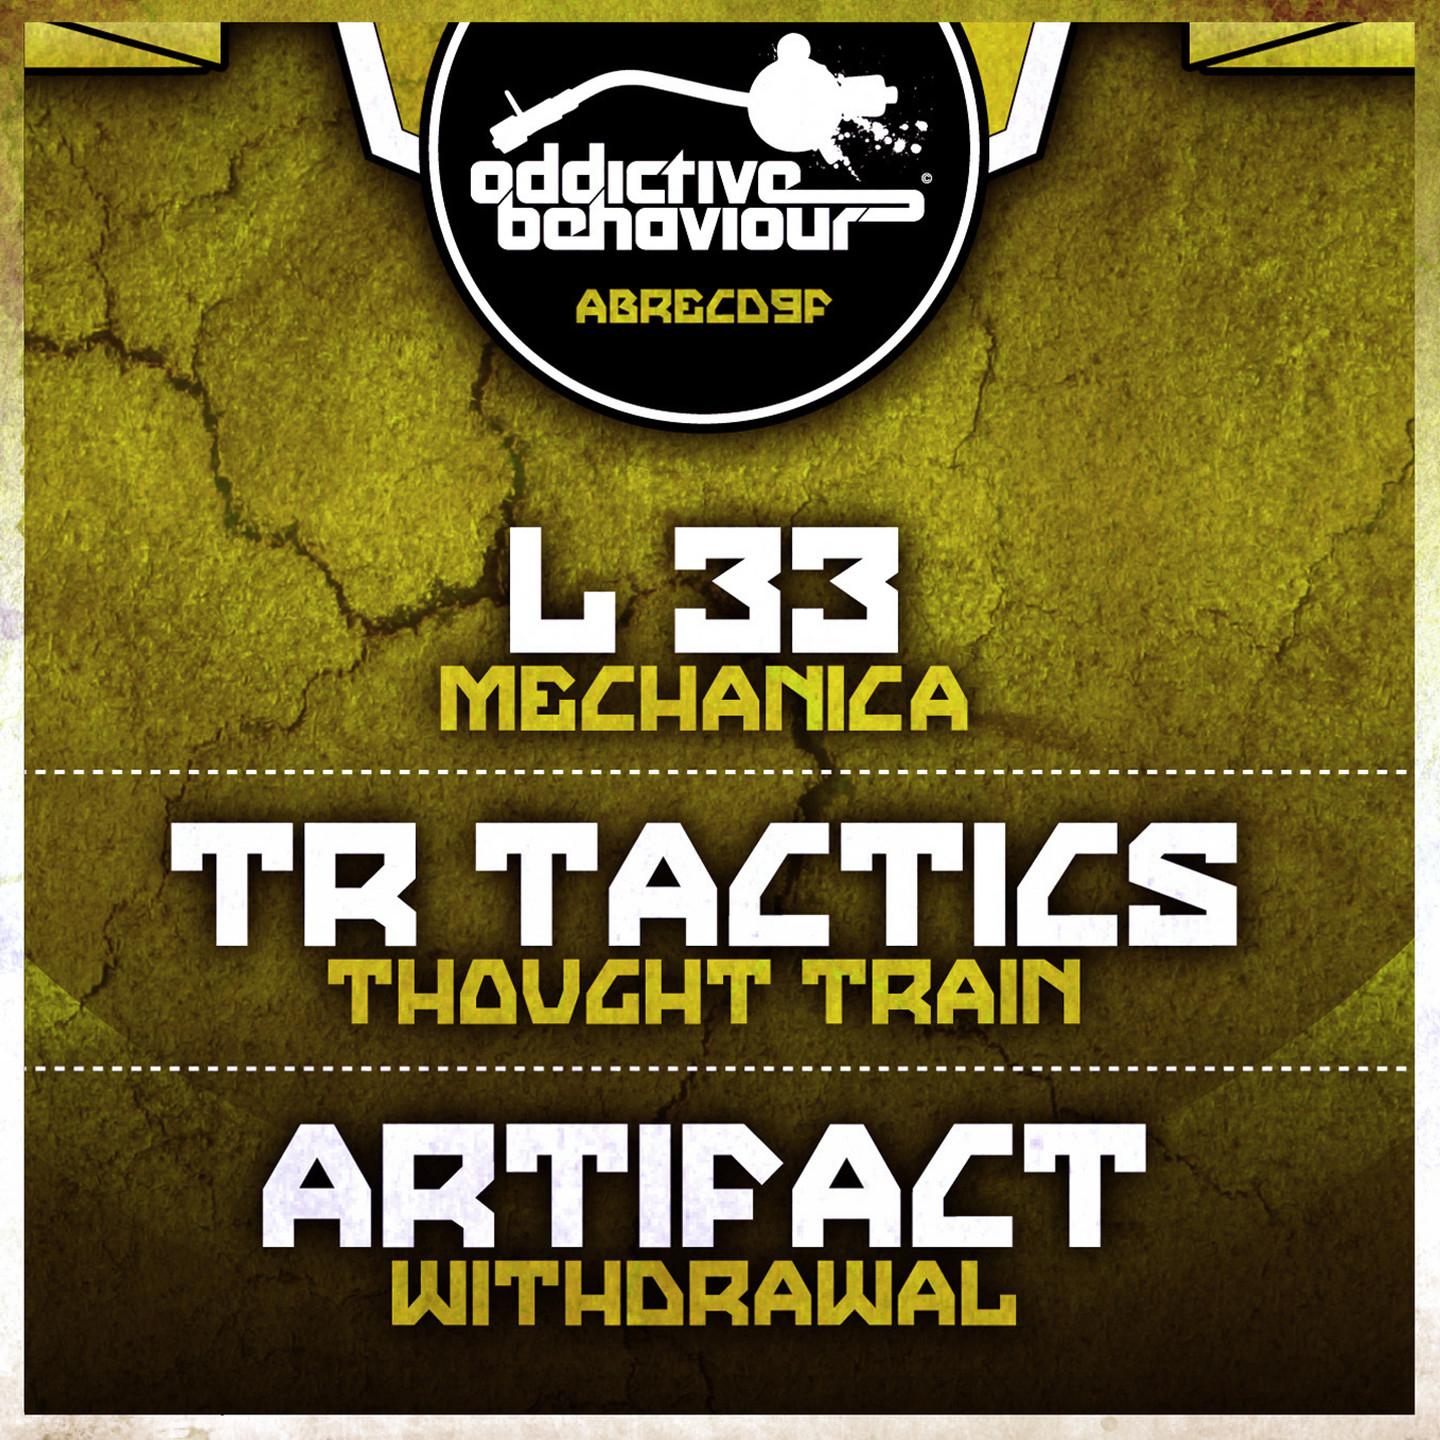 Mechanica / Thought Train / Withdrawal